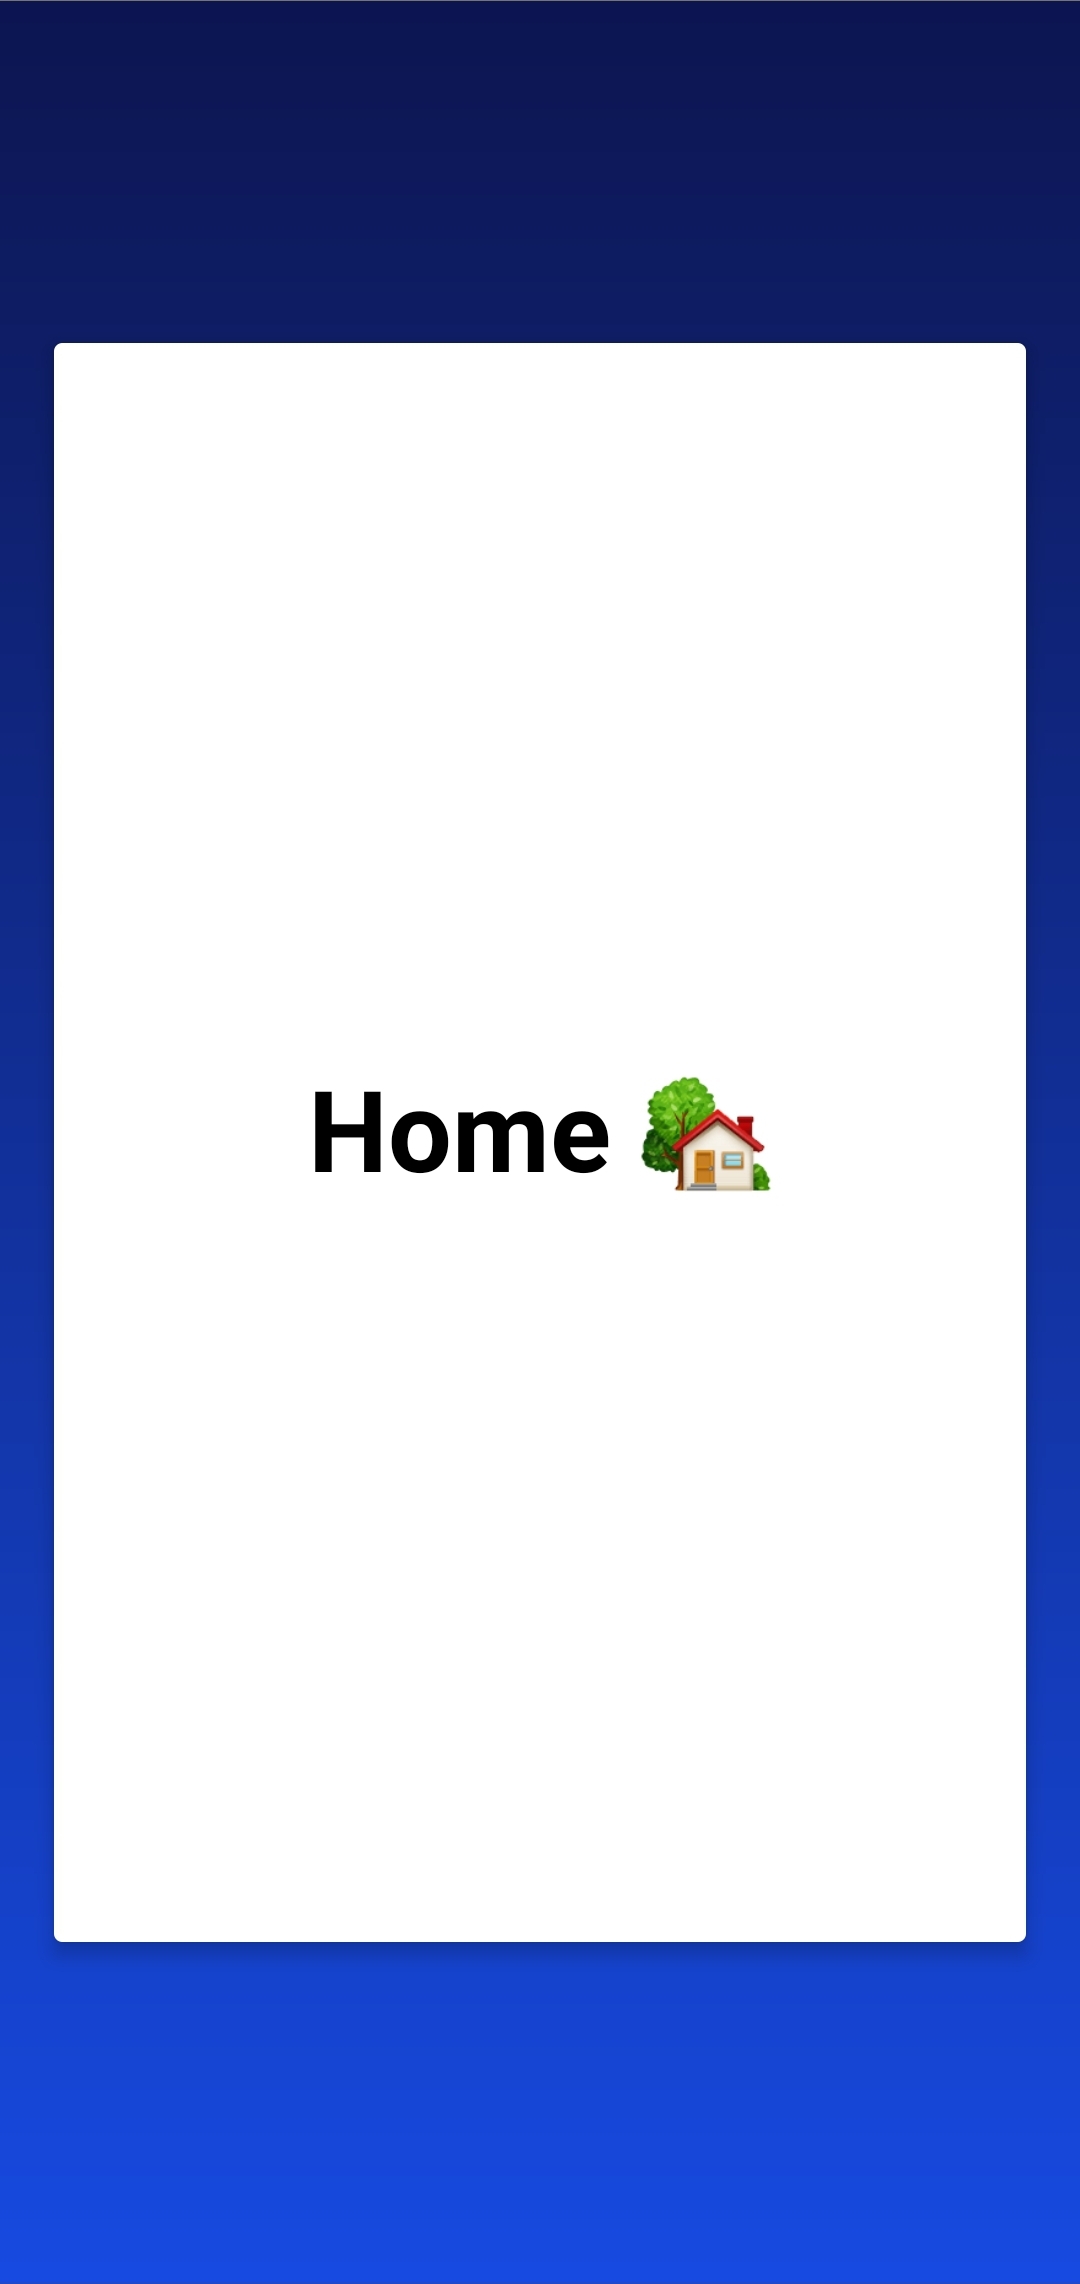 A screenshot of a mobile phone image containing a blue background and on top white boxed area with the text 'Home' and an icon of a house next to it.